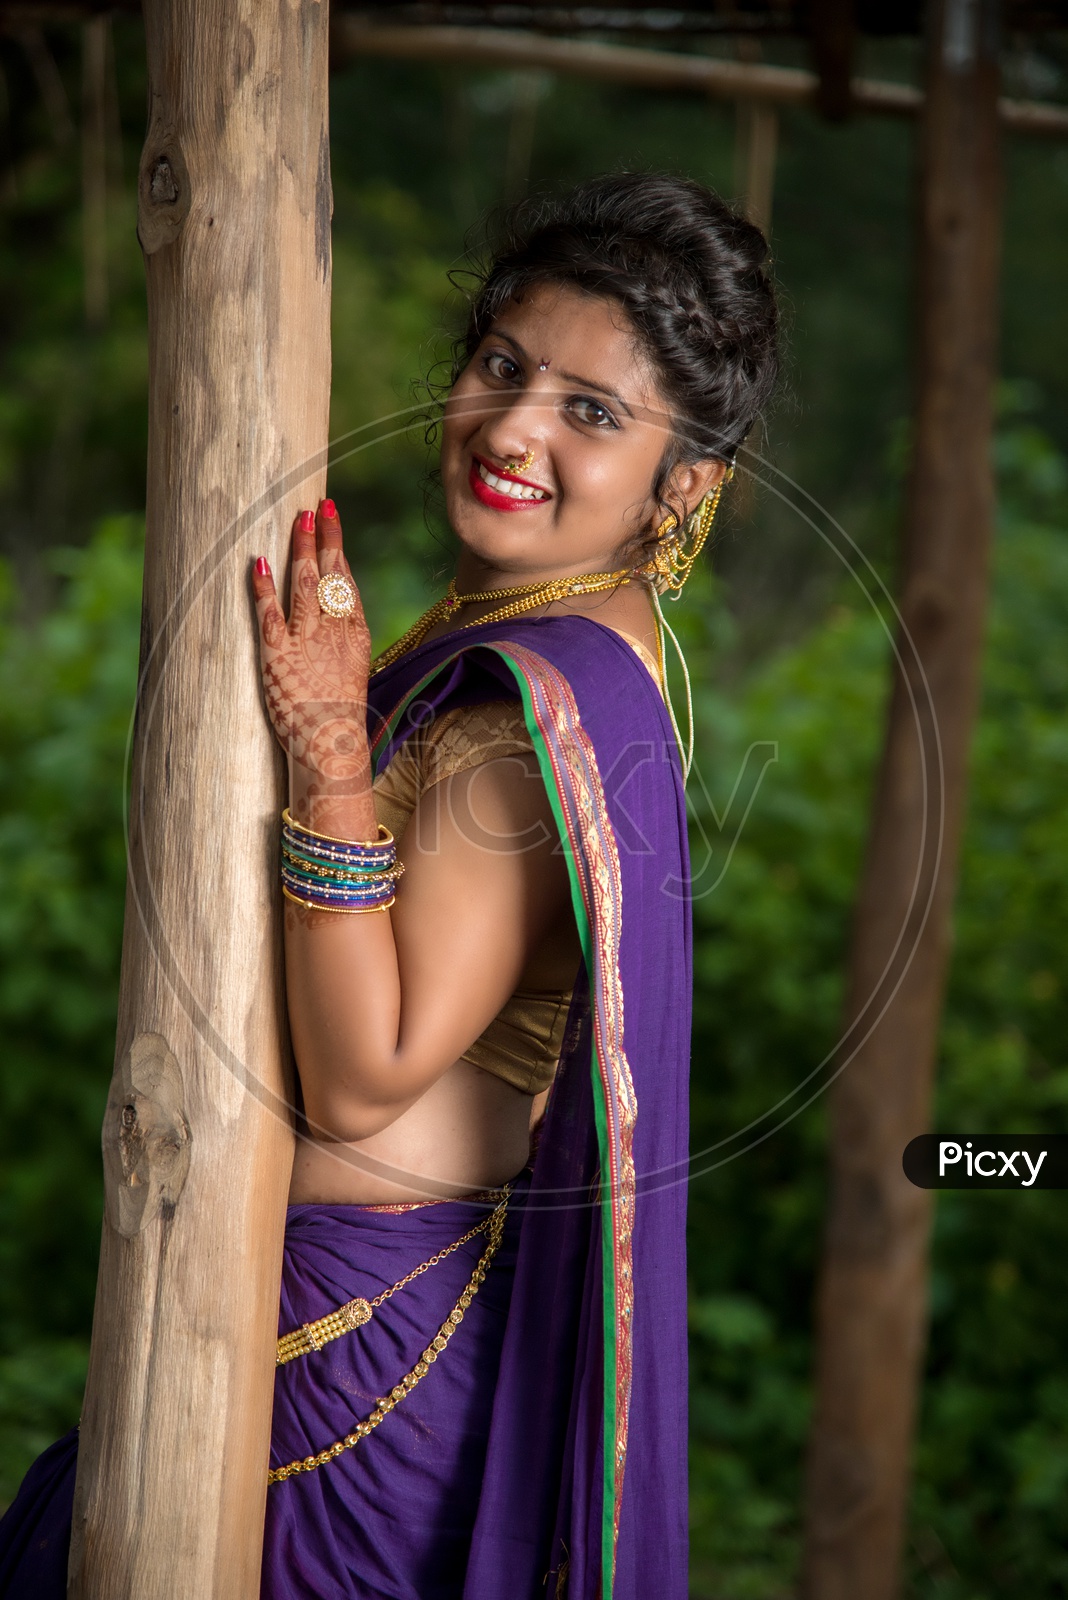 Indian Lady Traditional Saree Seat Pose Stock Photo 687380125 | Shutterstock-megaelearning.vn